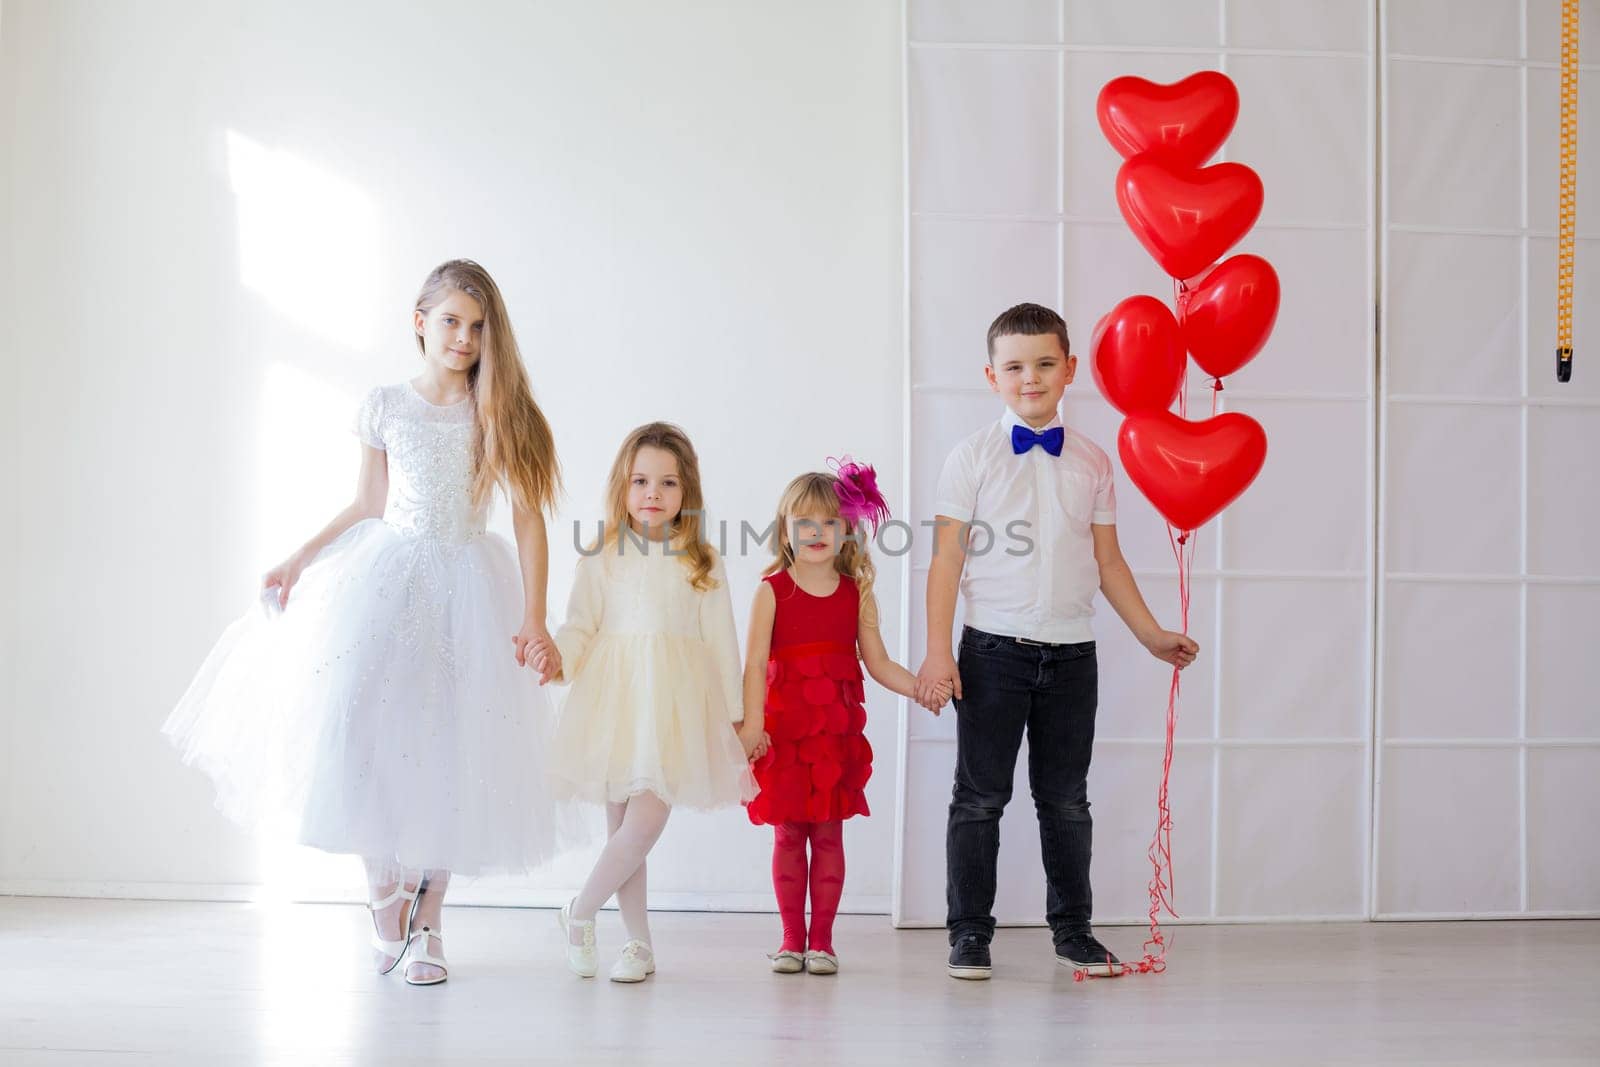 beautiful children with red heart balloons nice by Simakov